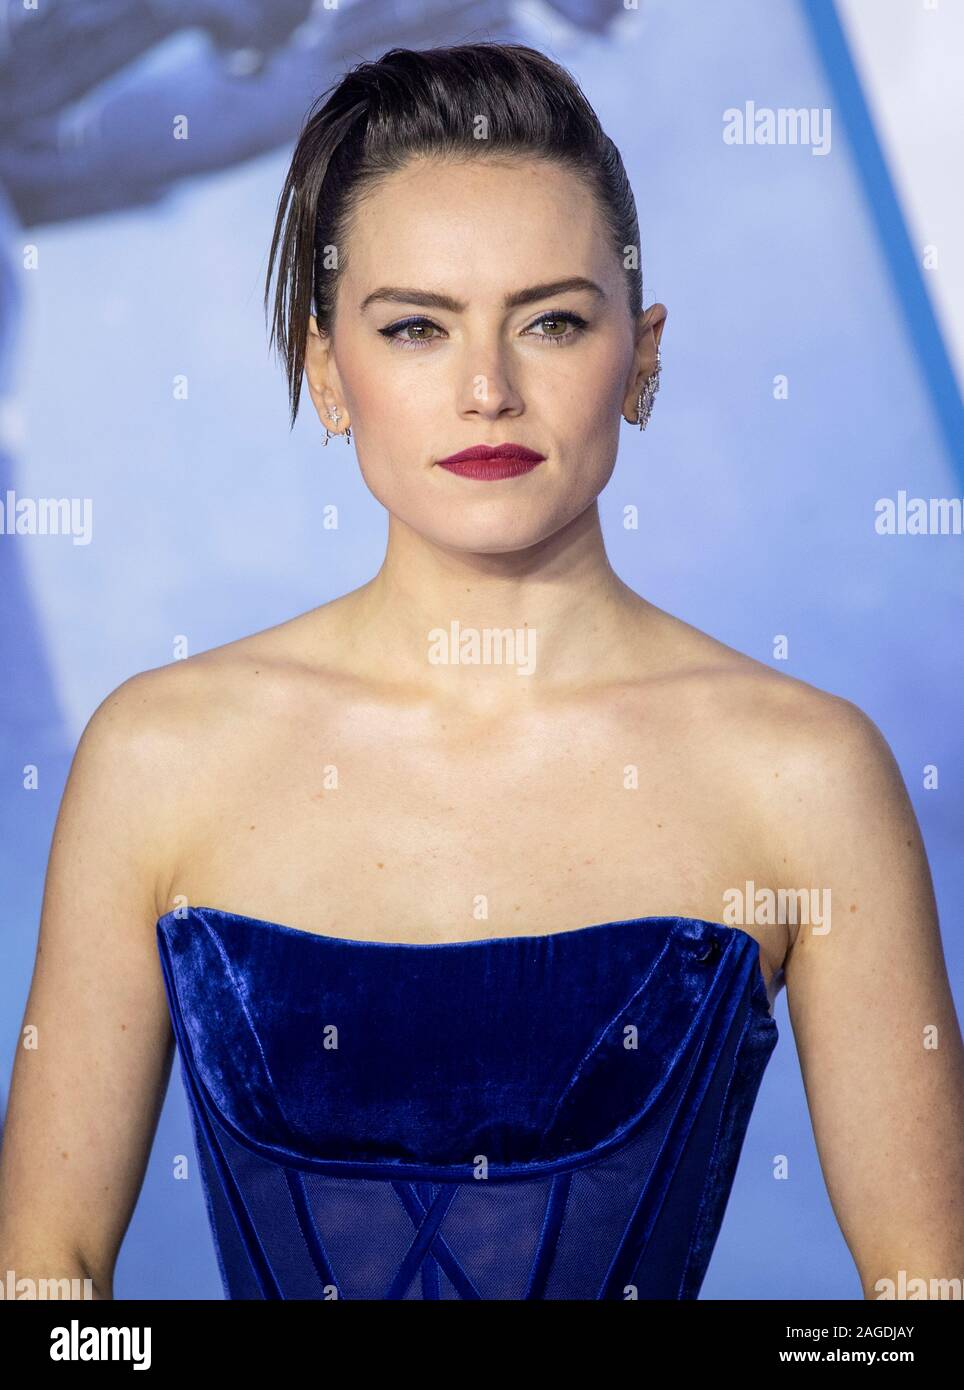 London, UK. 18th Dec, 2019. LONDON, ENGLAND - DECEMBER 18: Daisy Ridley attends the European Premiere of 'Star Wars: The Rise of Skywalker' at Cineworld Leicester Square on December 18, 2019 in London, England. Credit: Gary Mitchell, GMP Media/Alamy Live News Stock Photo